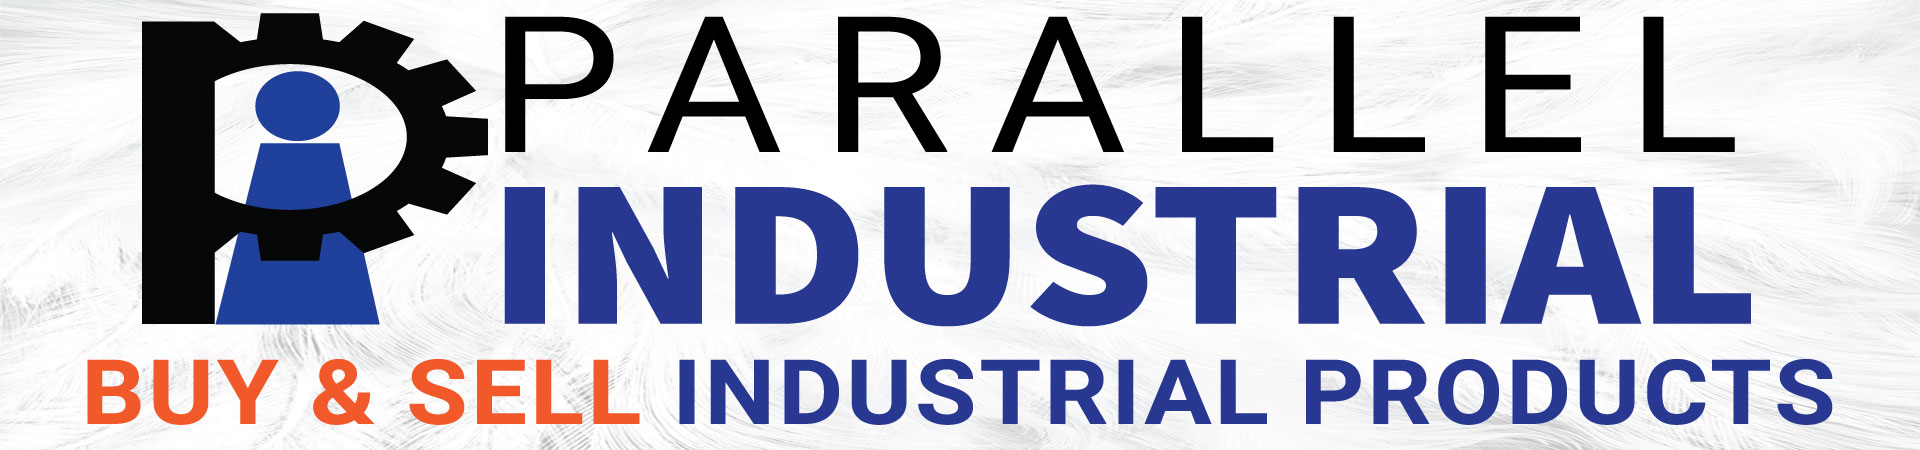 Parallel Industrial Buy and sell industrial products